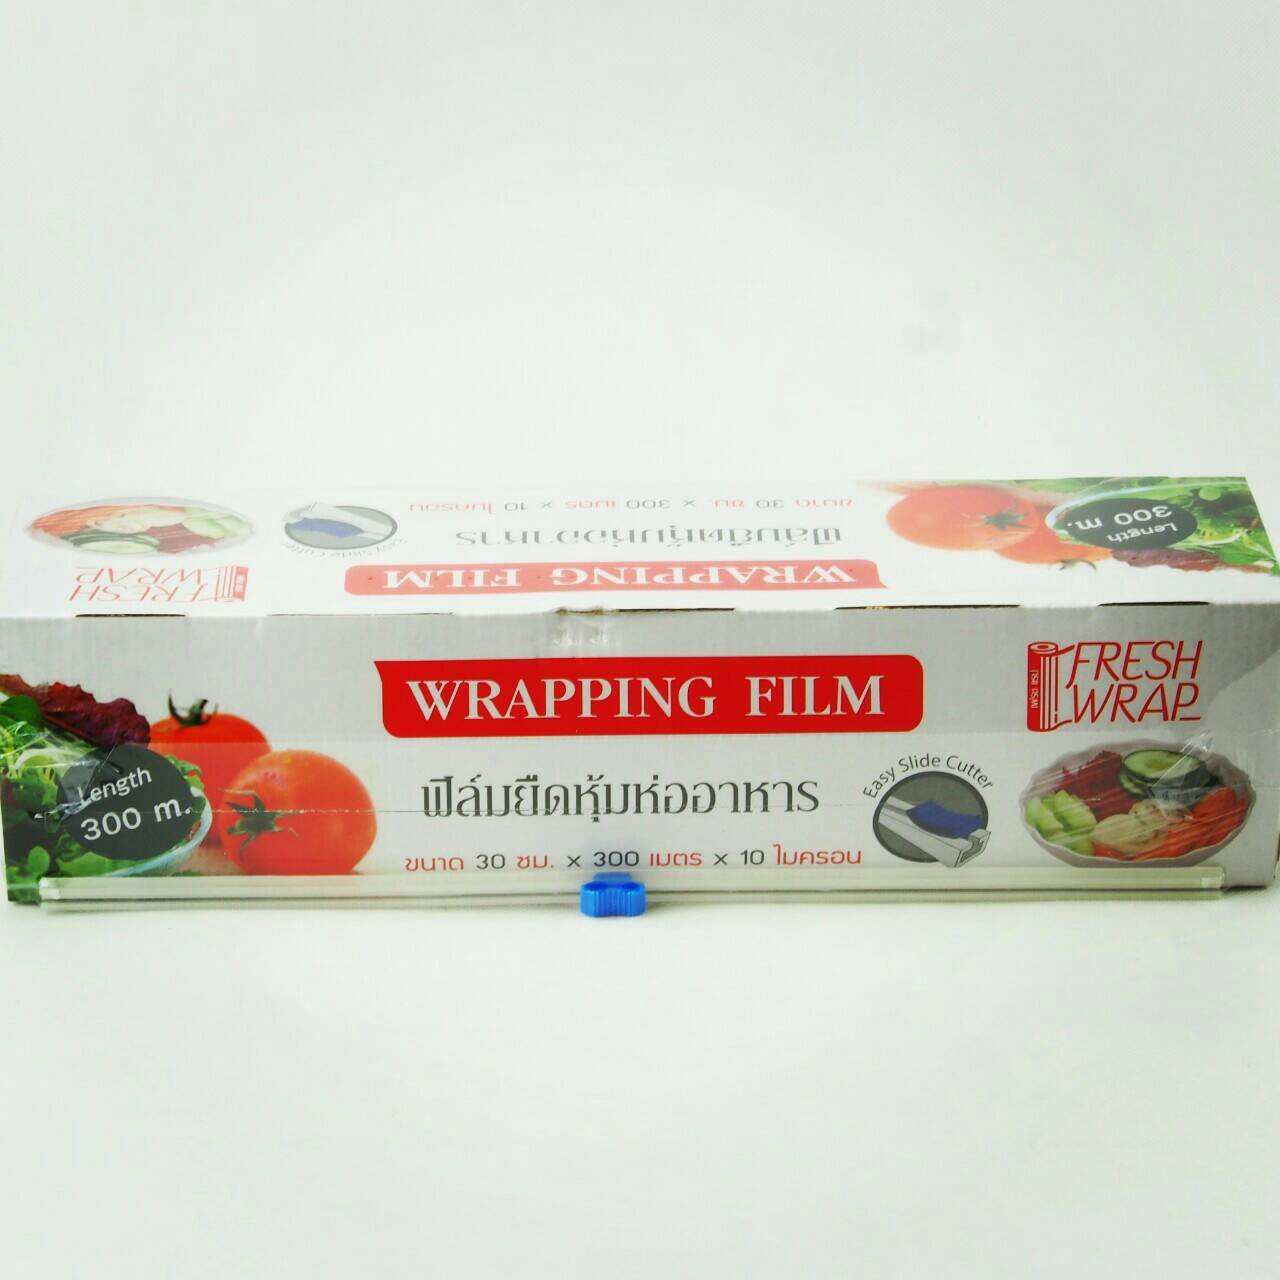 Cling Film with blade 30 cm.x 300 m. x 10 my